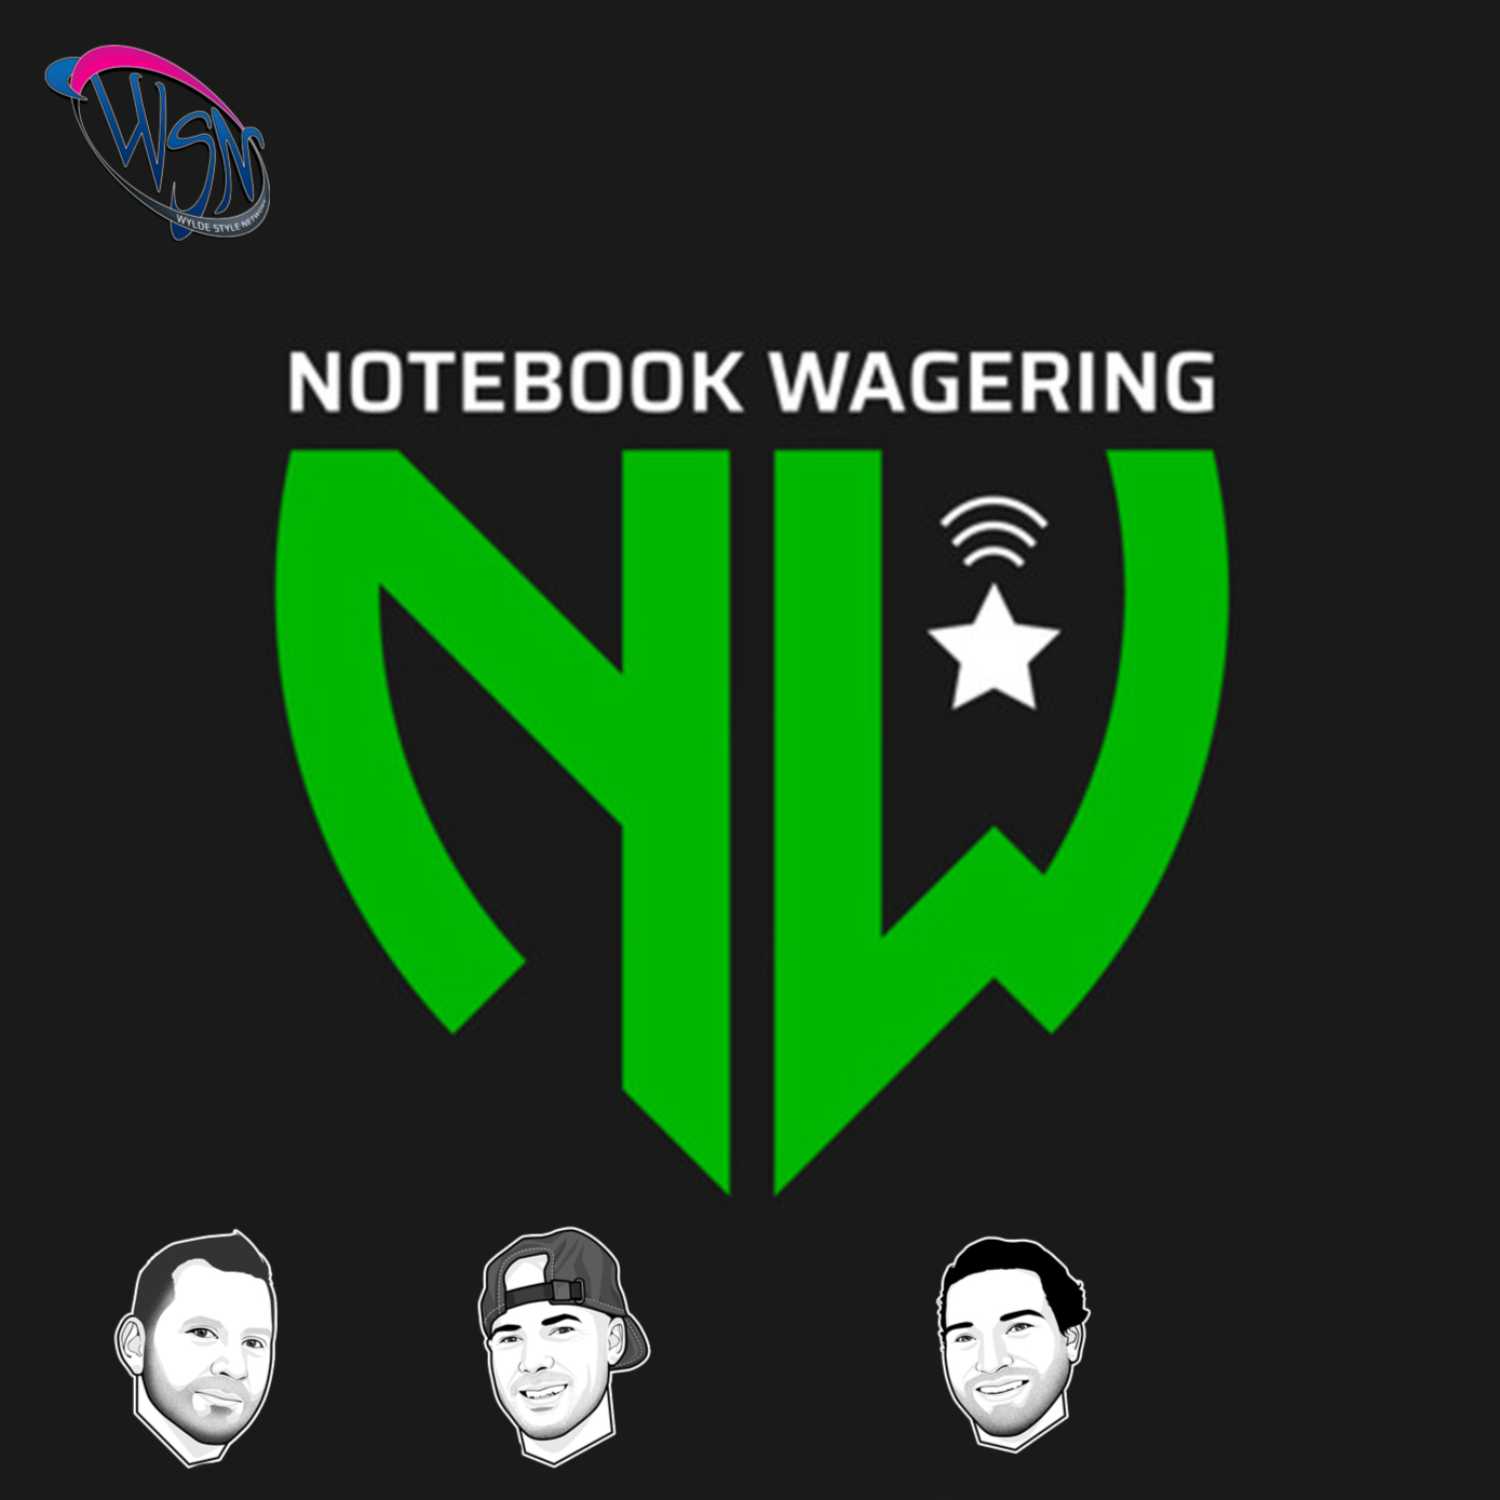 Holiday Cheer & Pickin' Winners | Notebook Wagering | Wylde Style Network...Fueled by Monster Energy